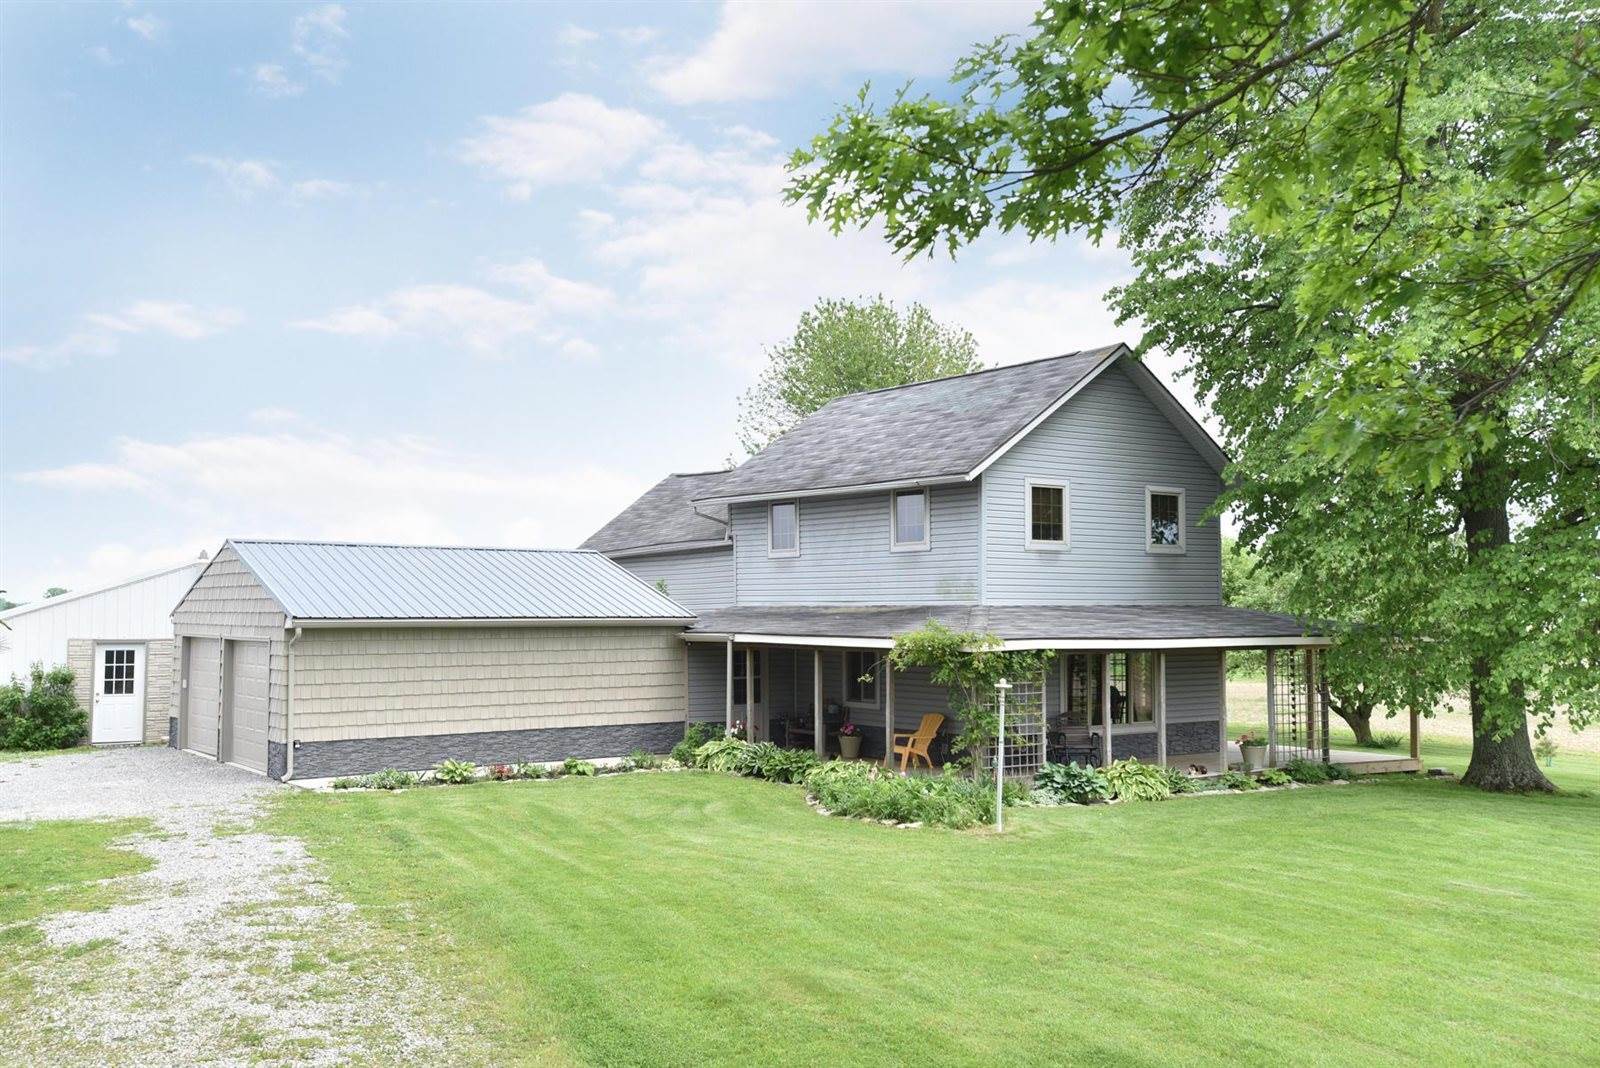 30760 Snare Road, Richwood, OH 43344